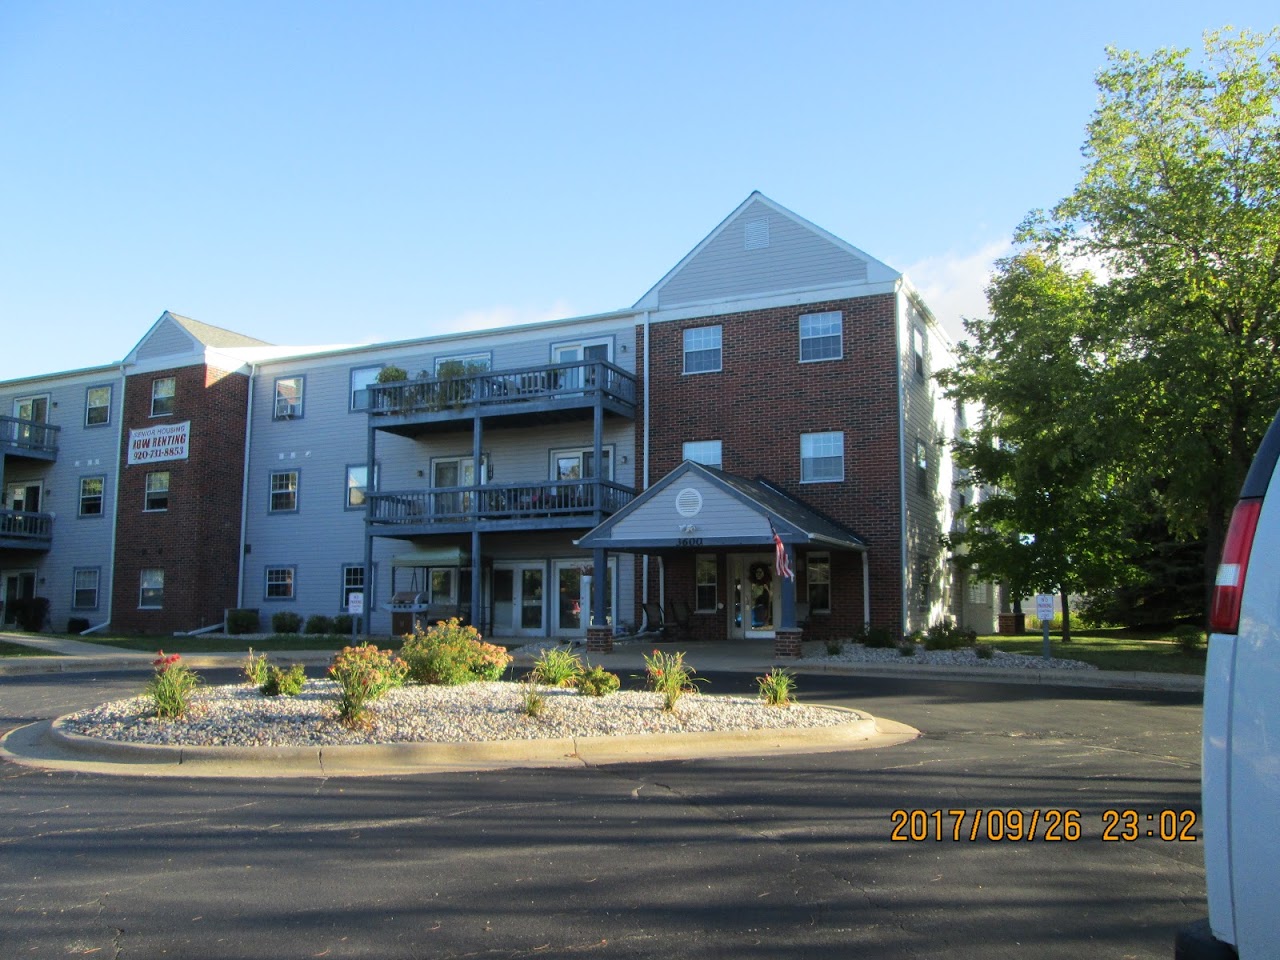 Photo of COURTYARD APTS (GRAND CHUTE). Affordable housing located at 3600 W WOODMAN DR GRAND CHUTE, WI 54914